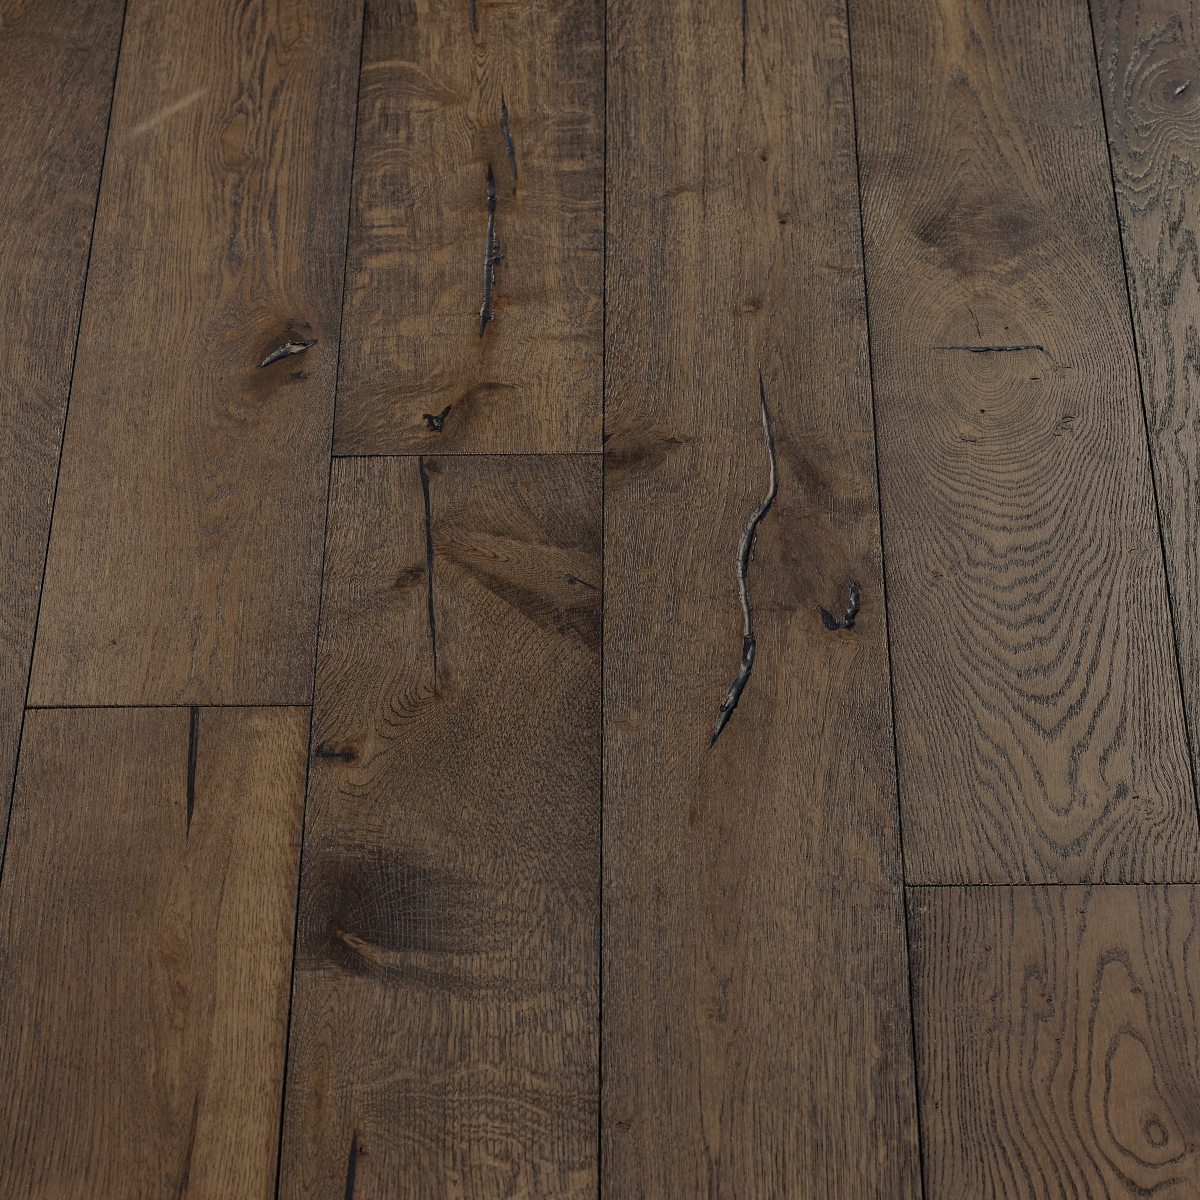 Black Olive Distressed Wood Flooring: An image displaying distressed black olive wood flooring with deep, rich brown hues and weathered textures, adding warmth and character to any space.